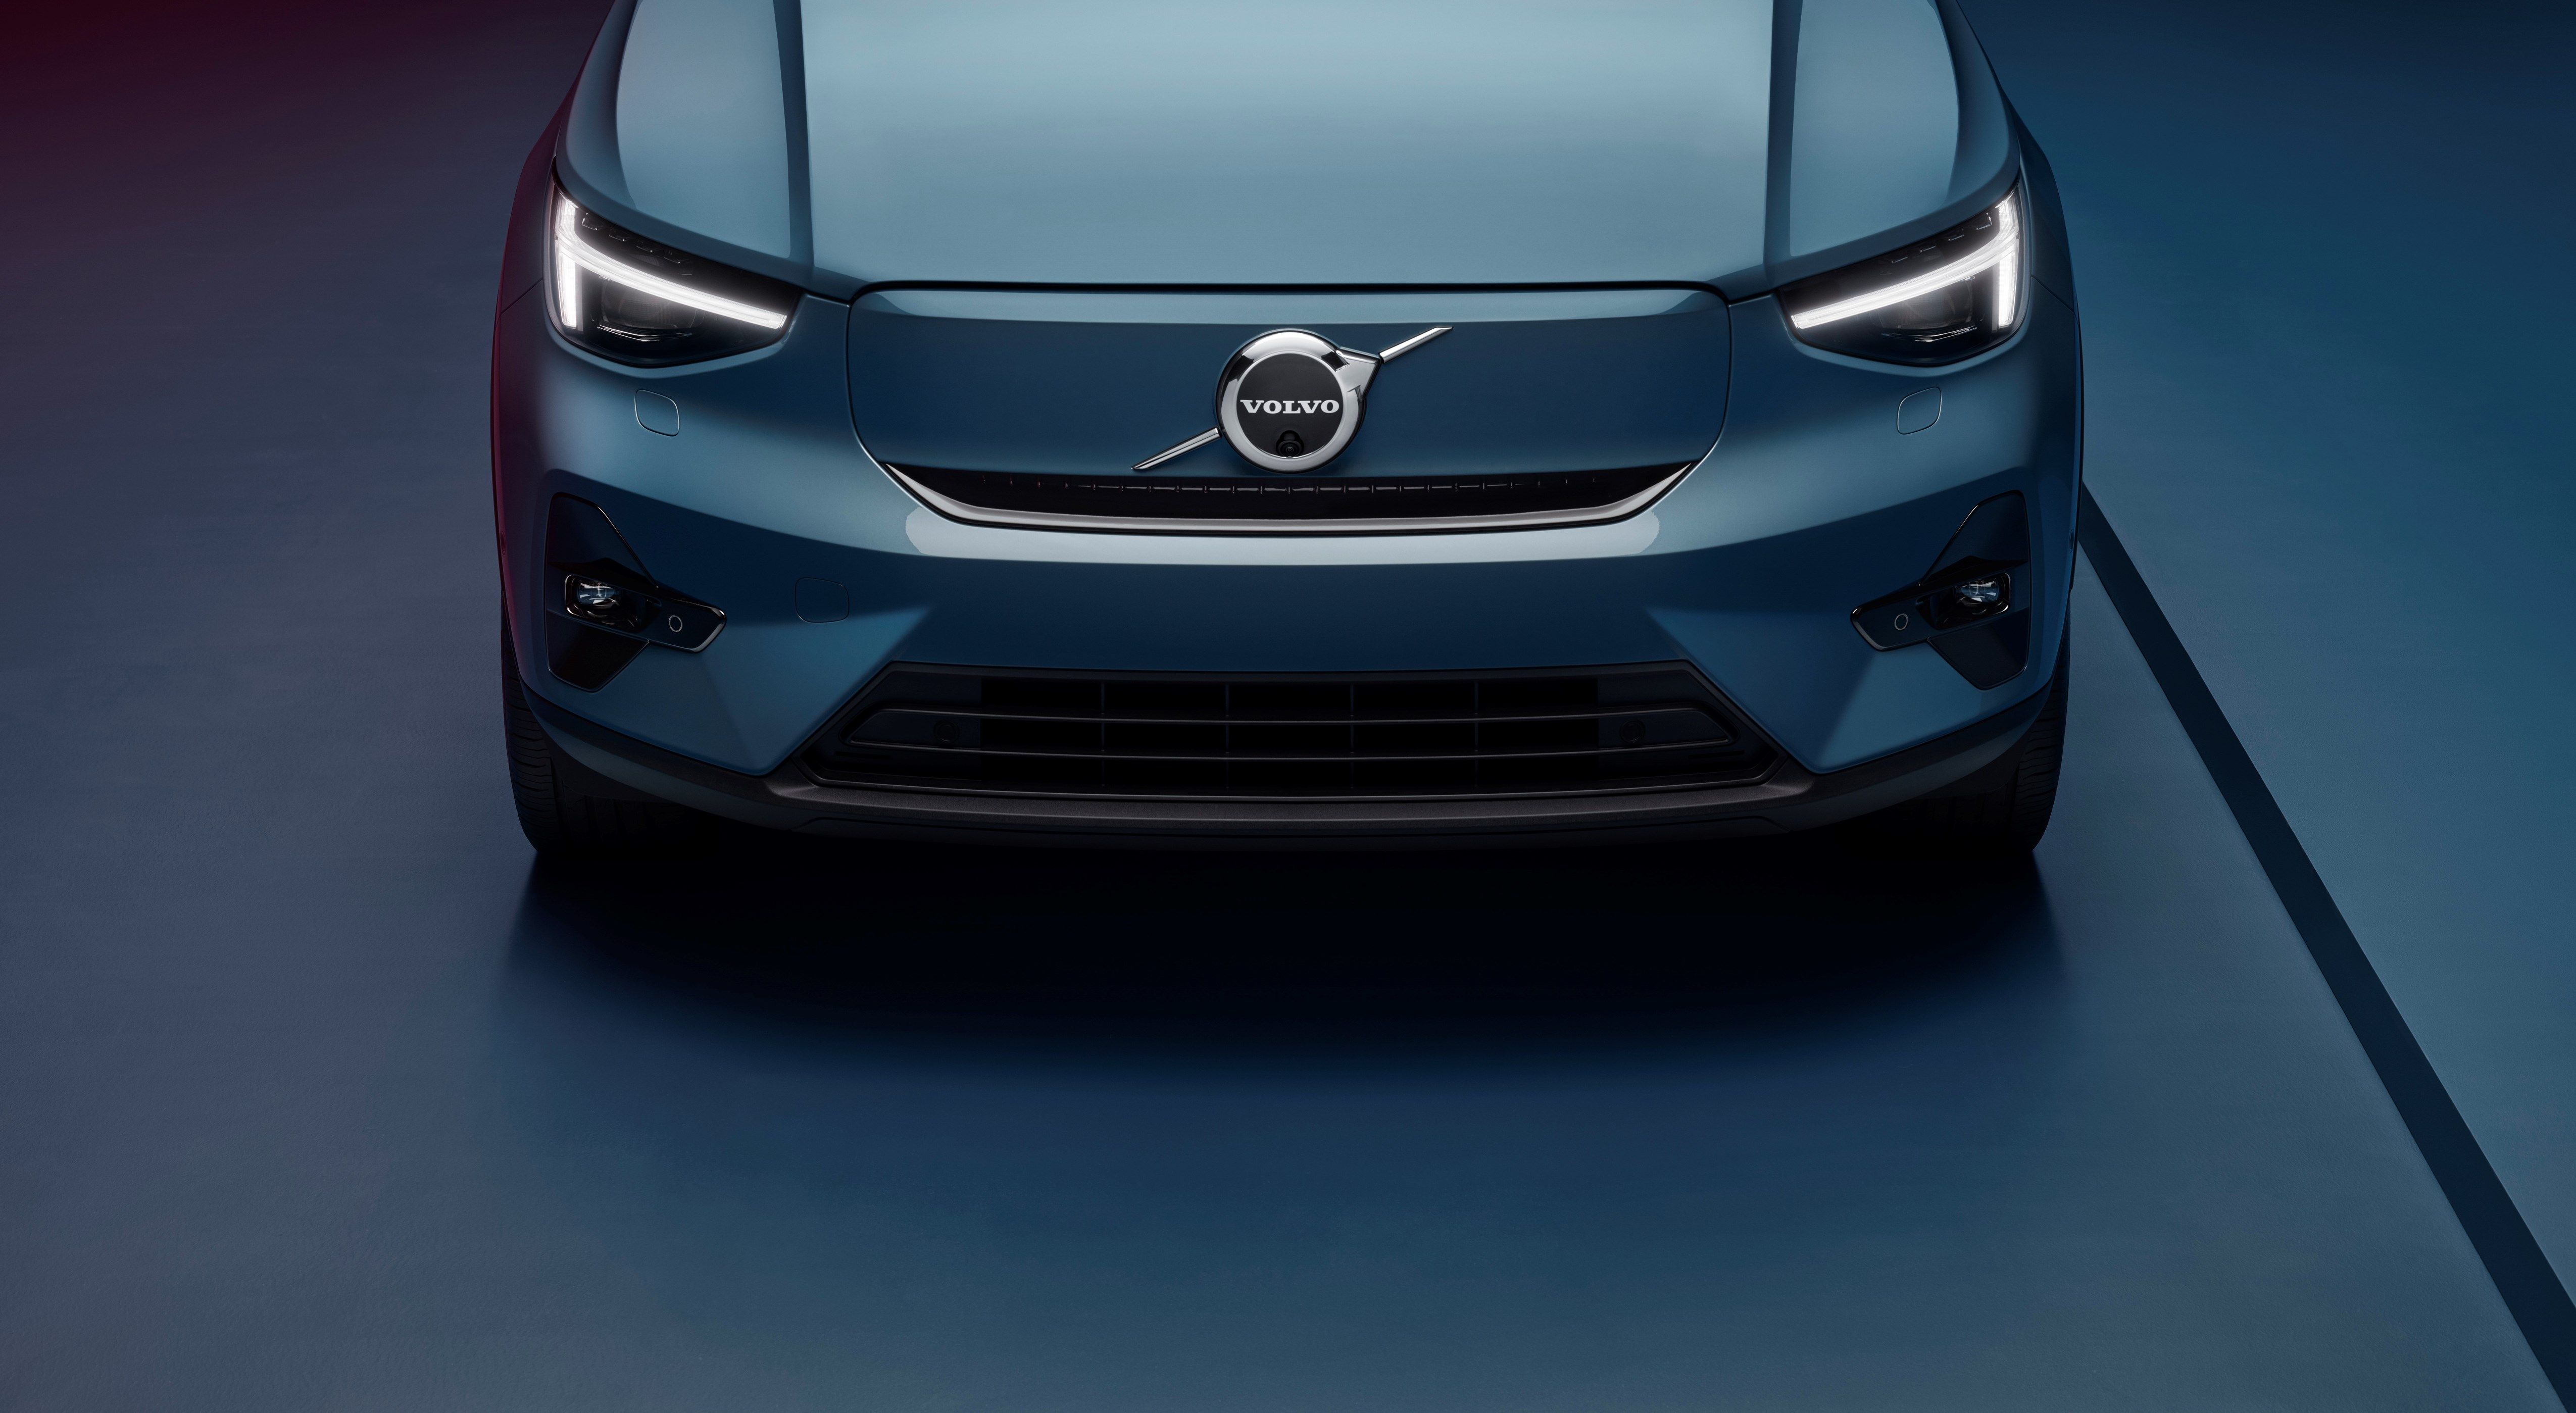 2022 Volvo C40 Recharge - The Swedish Automaker's Crossover With A Sloping Roofline